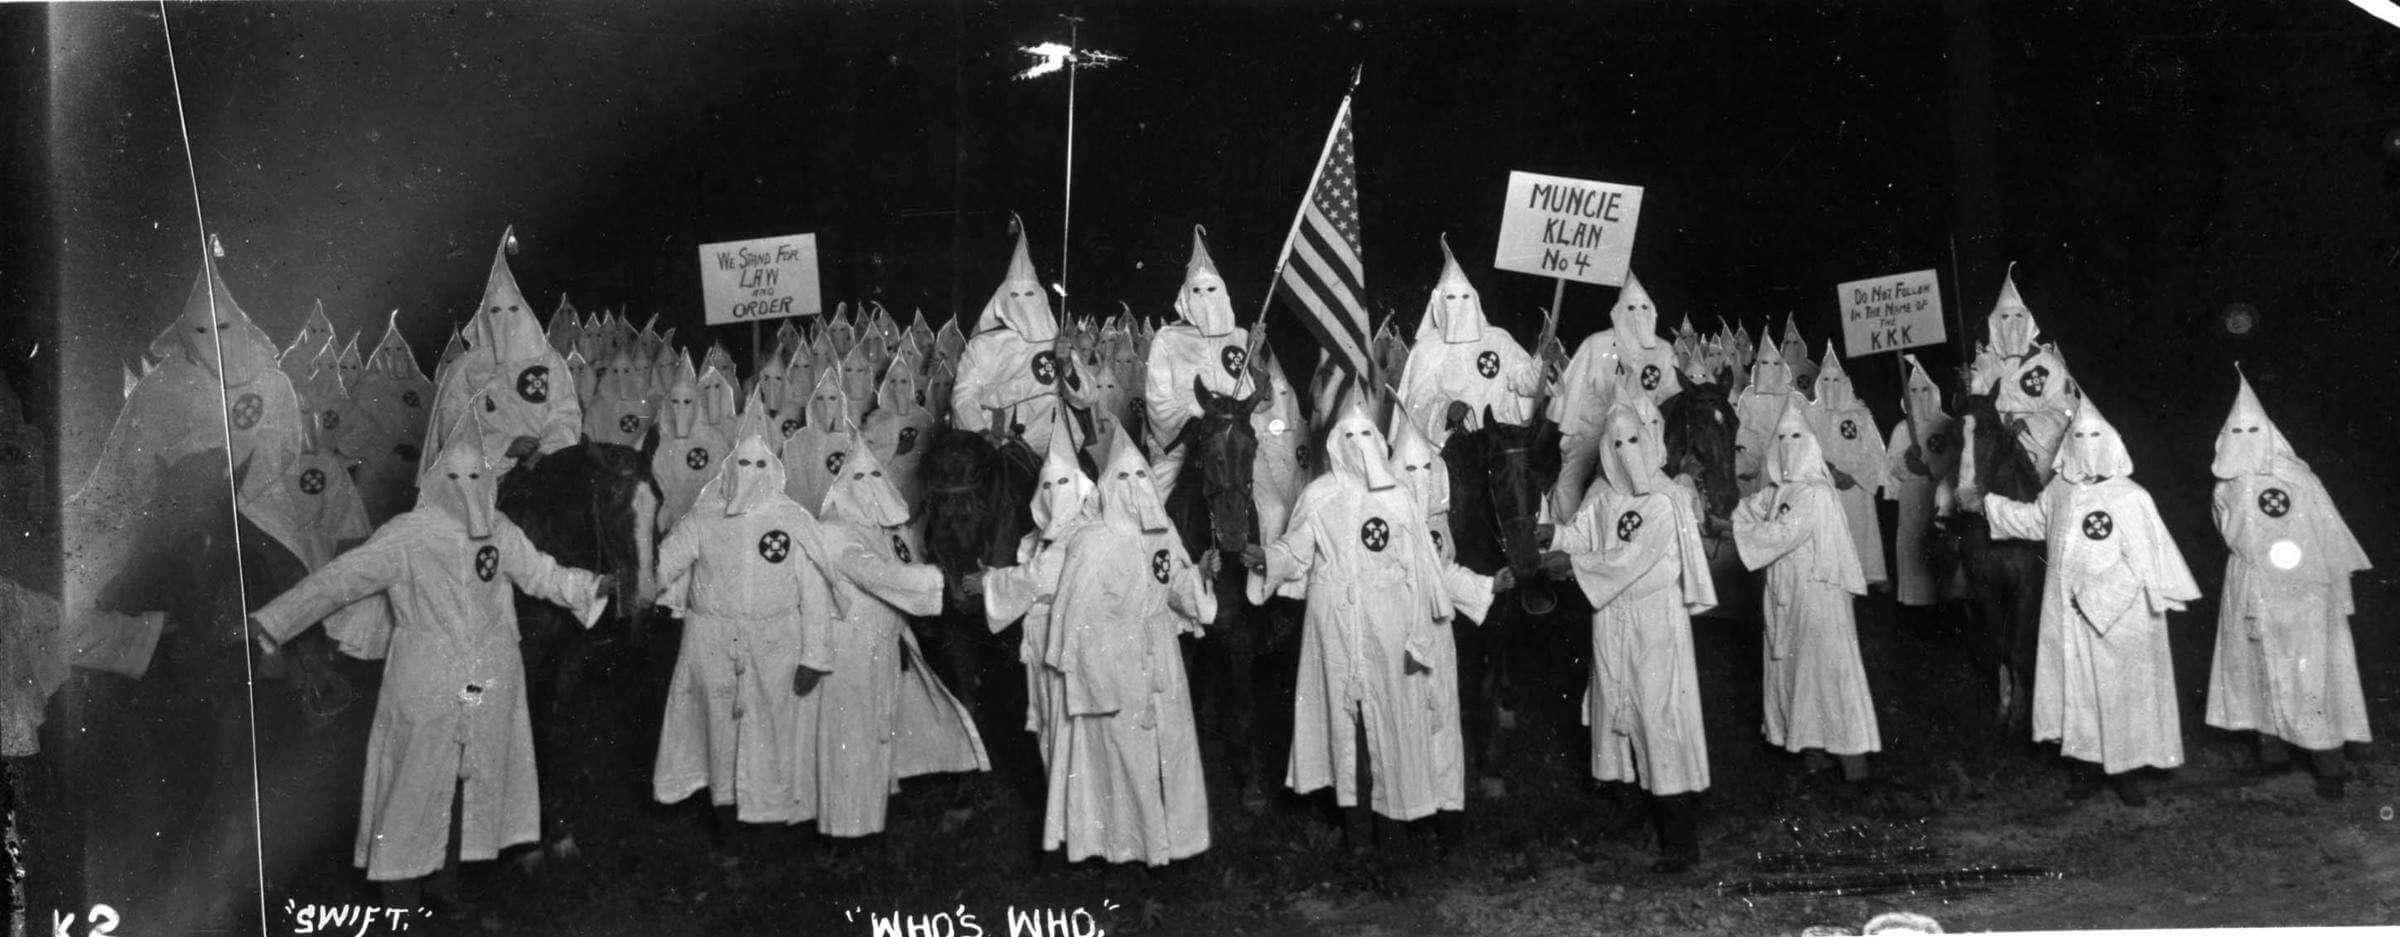 Picture of the KKK holding up signs at a rally